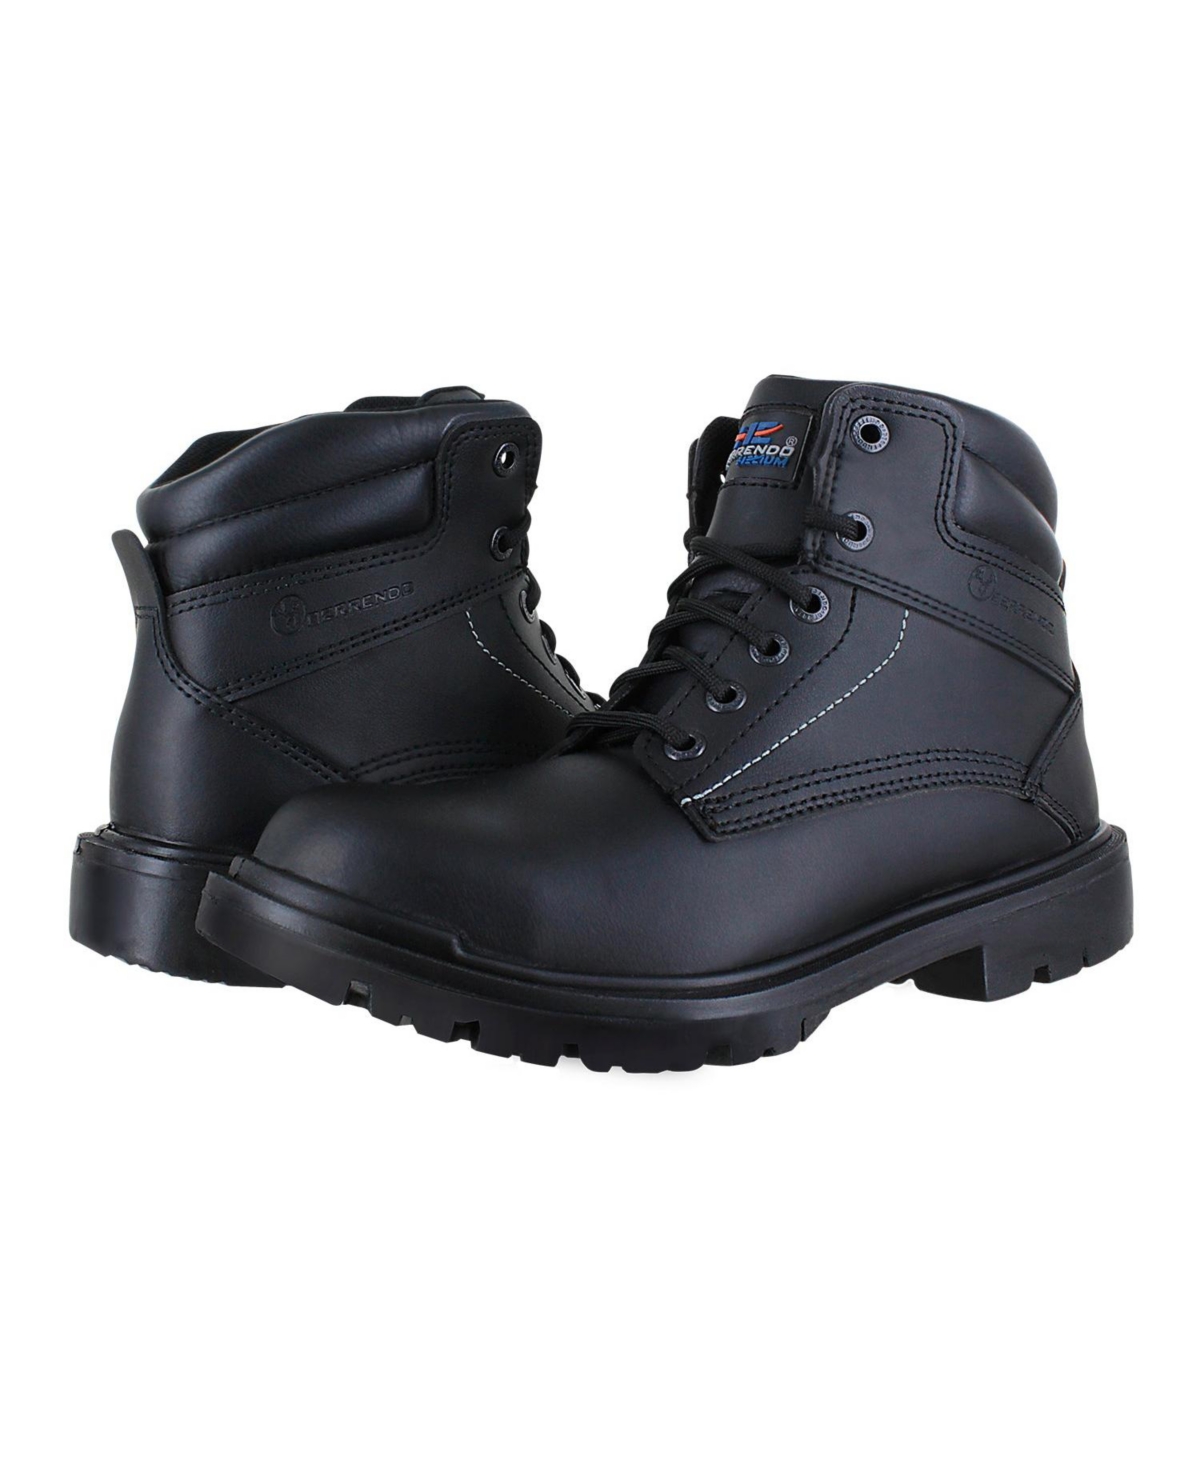 Work Boots For Men 6" - Soft Toe Boots - Eh Rated - Black